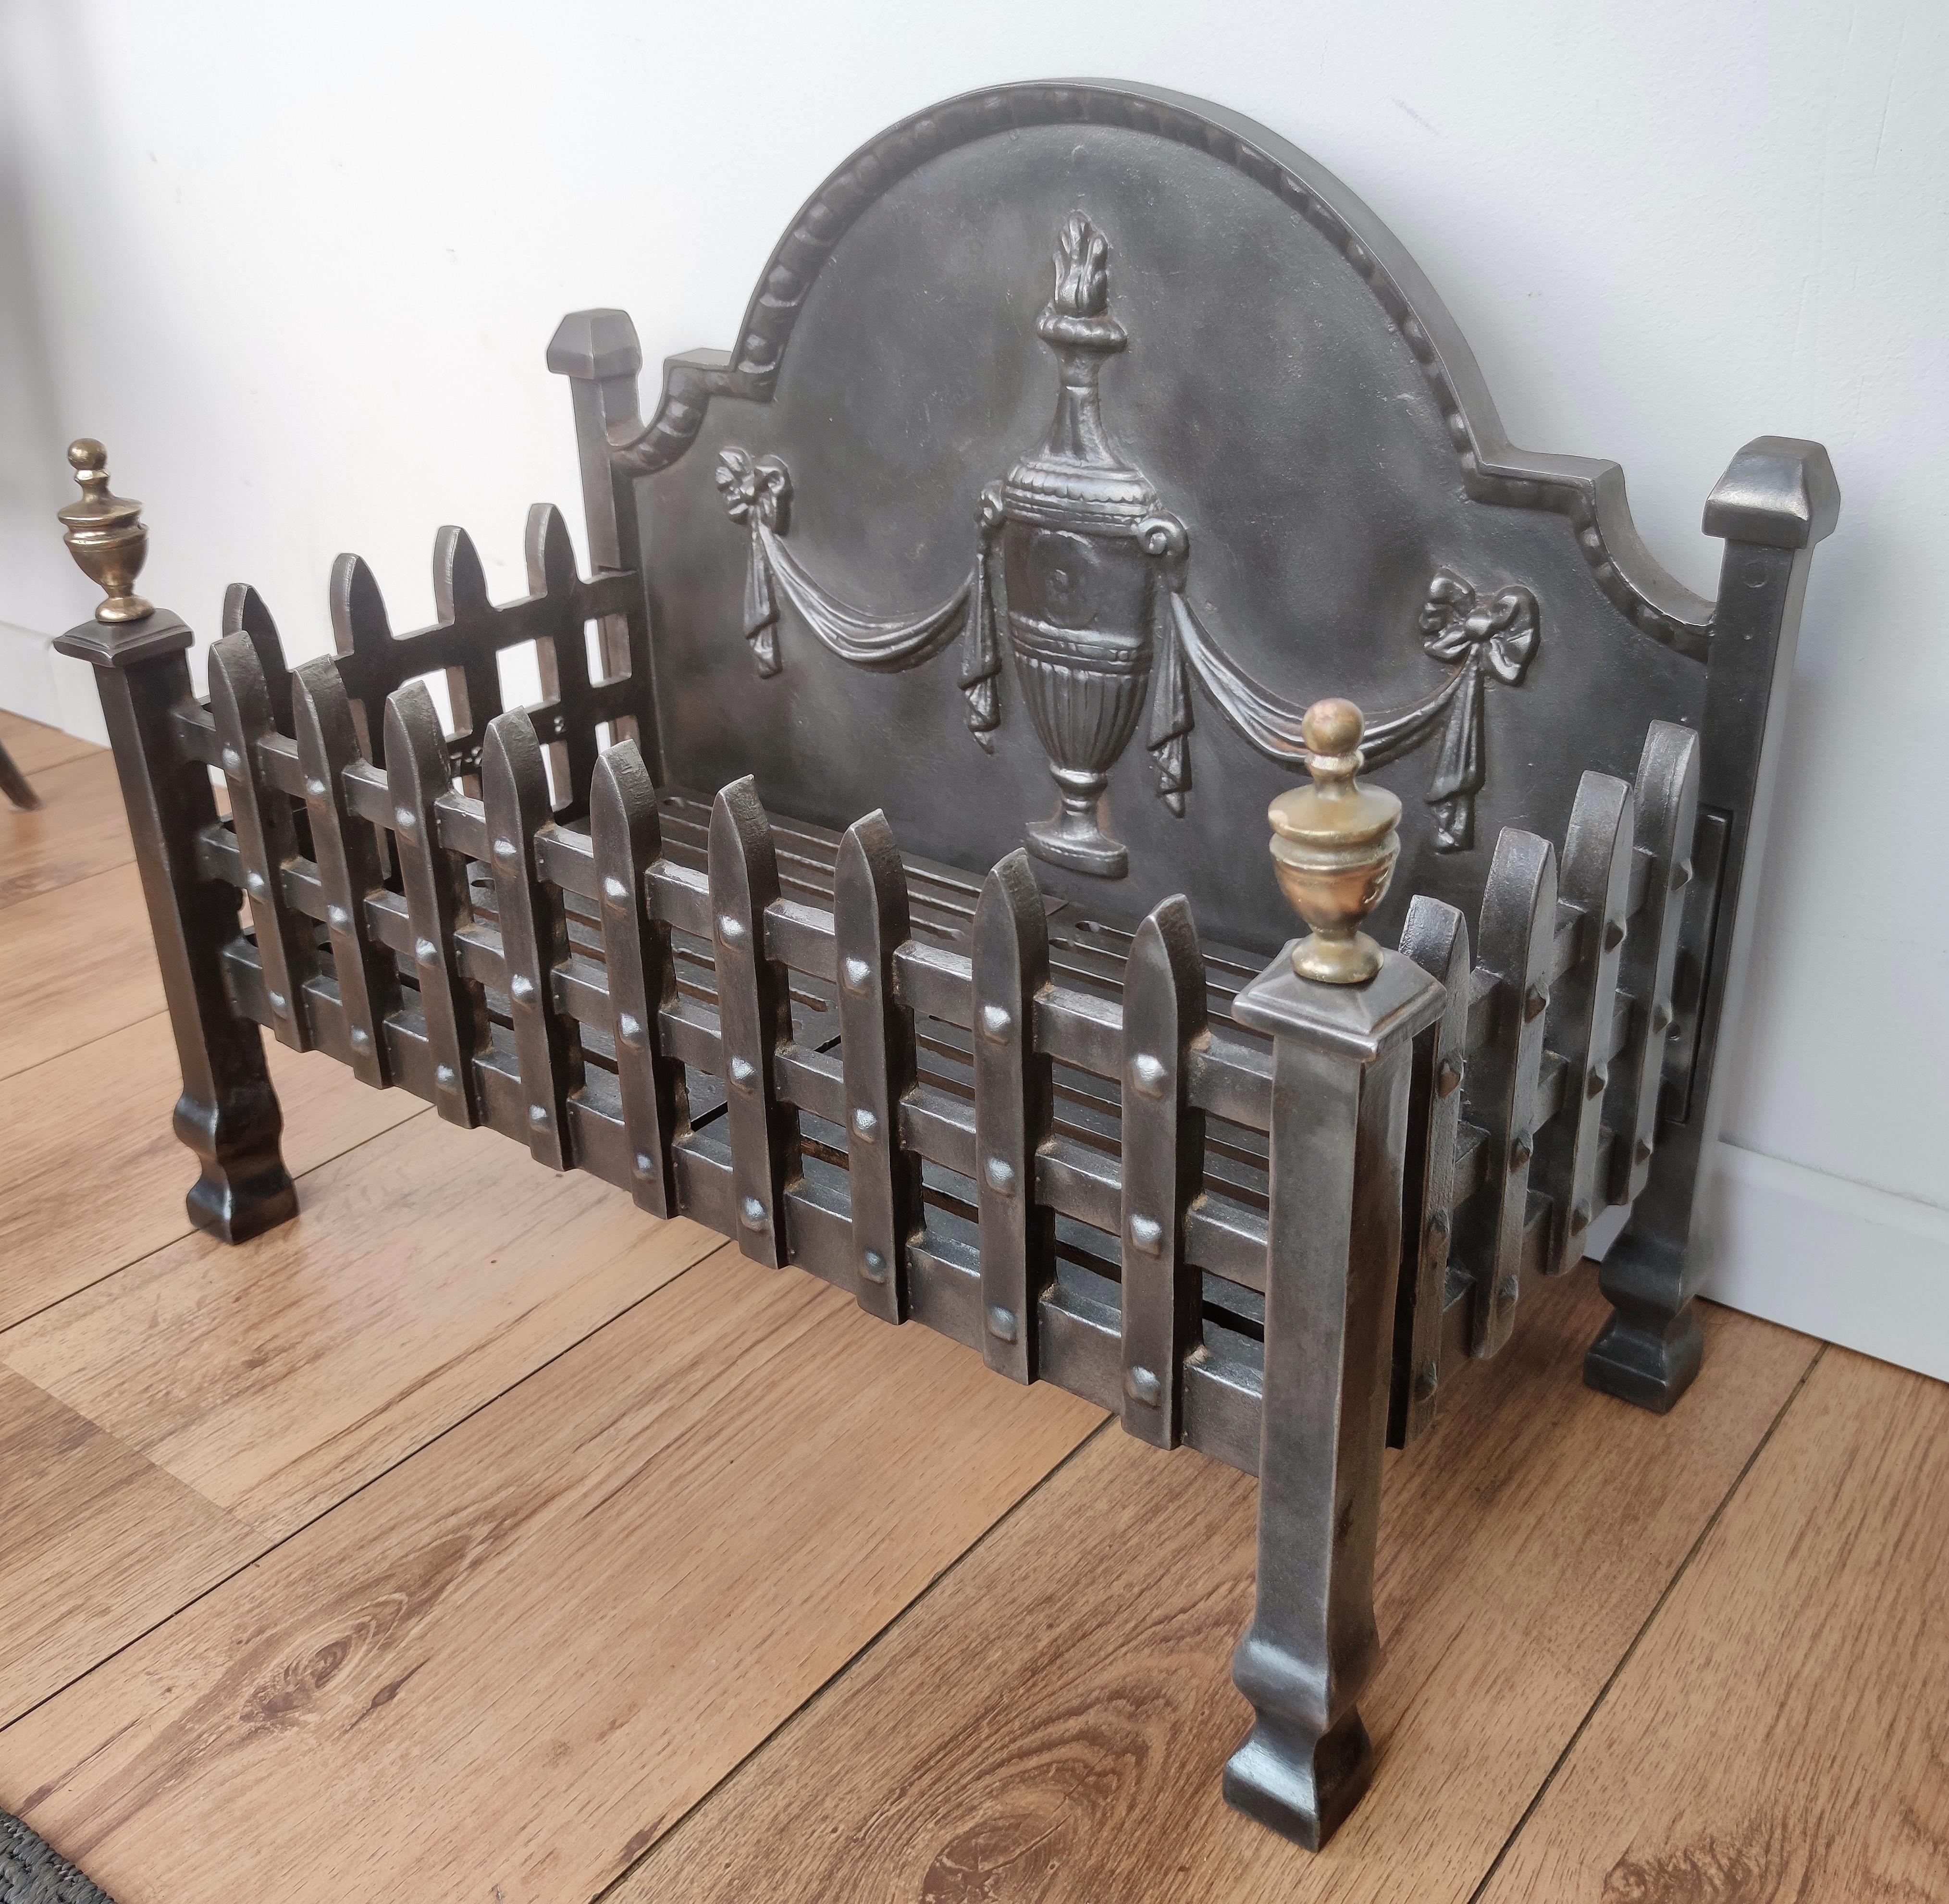 Cast iron Italian fire grate or log holder, with two beautiful neoclassical brass shapes on the sides and the decorated arched back. The item has been completey polished from previous use.